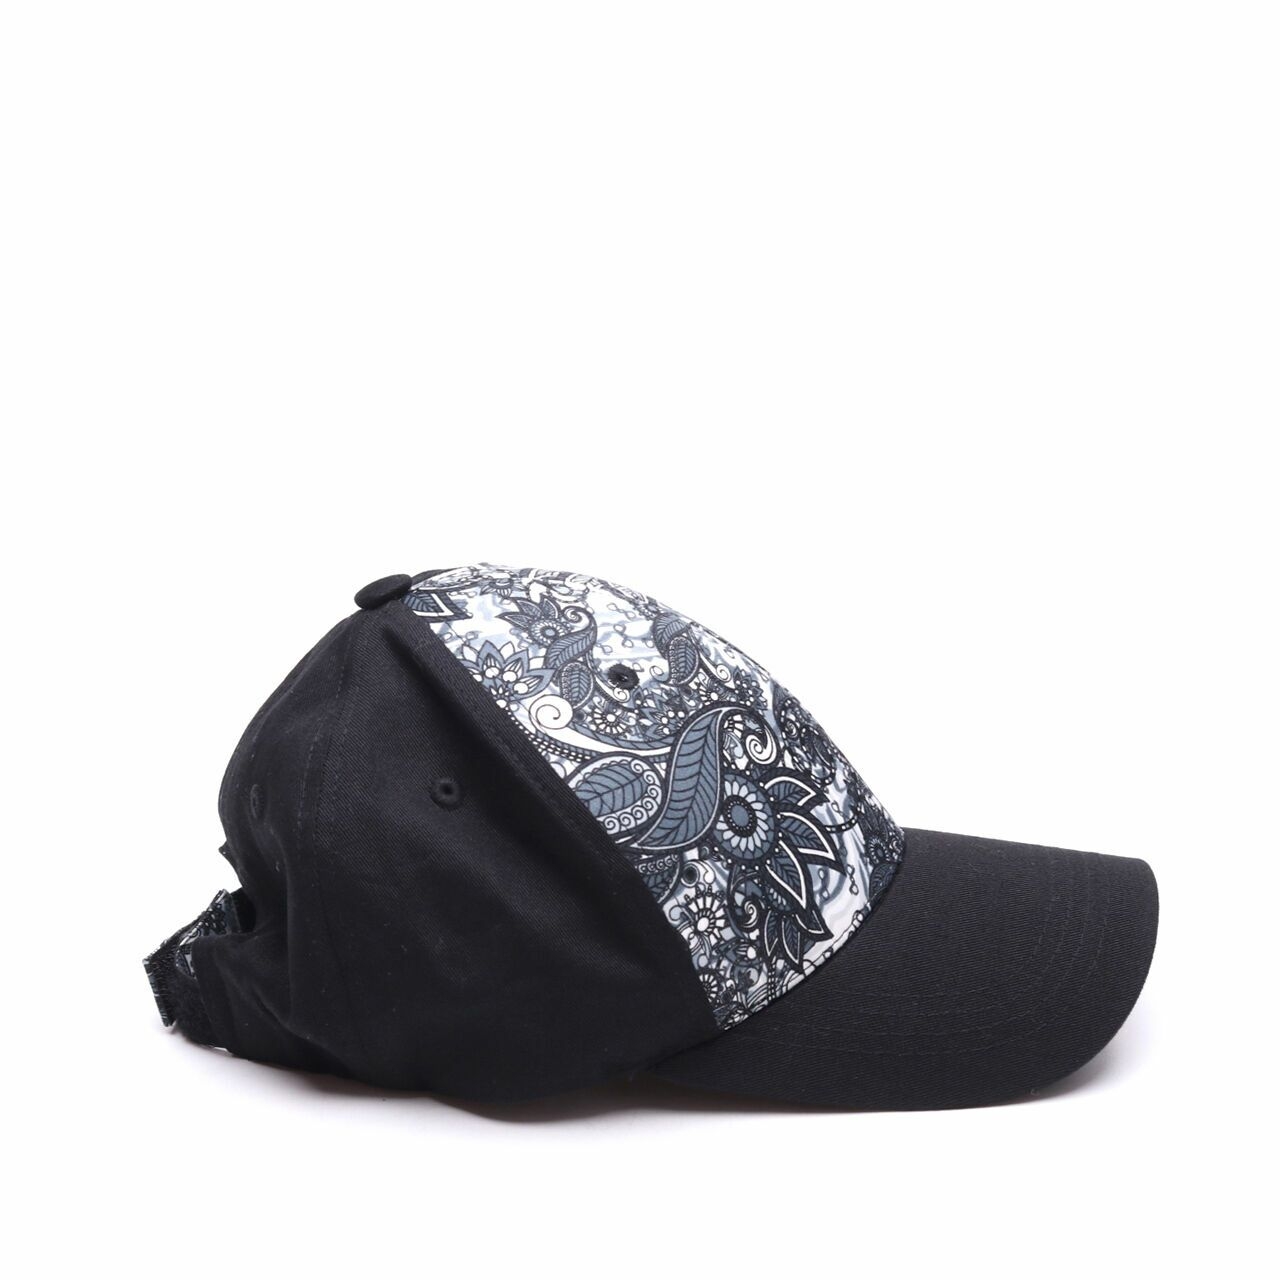 Private Collection Black Patterned Hats